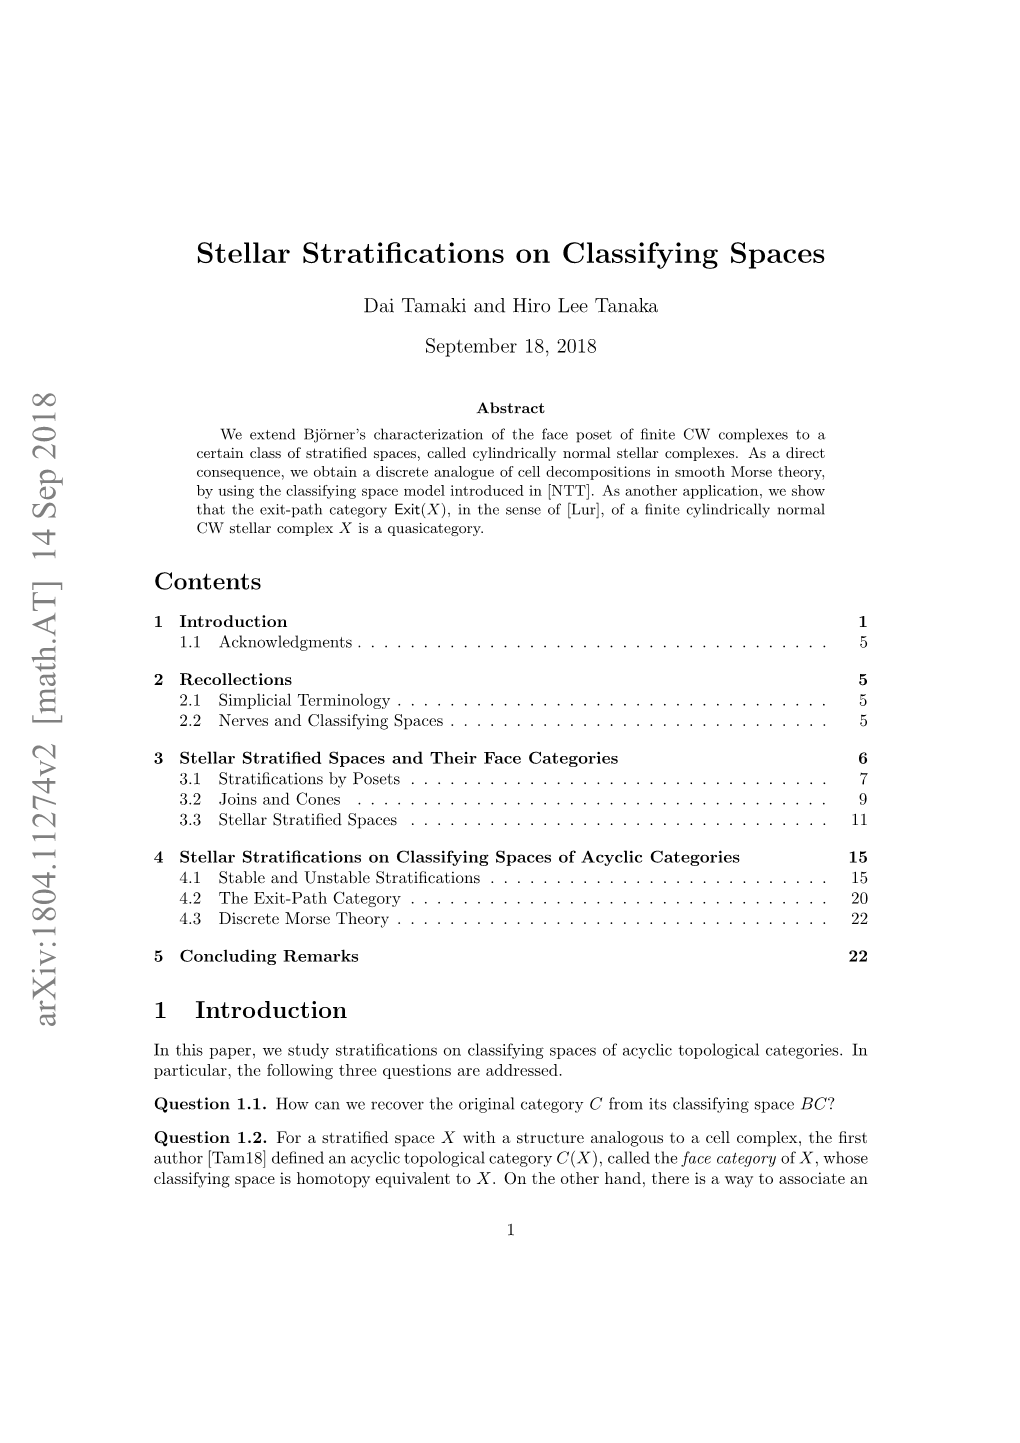 Stellar Stratifications on Classifying Spaces